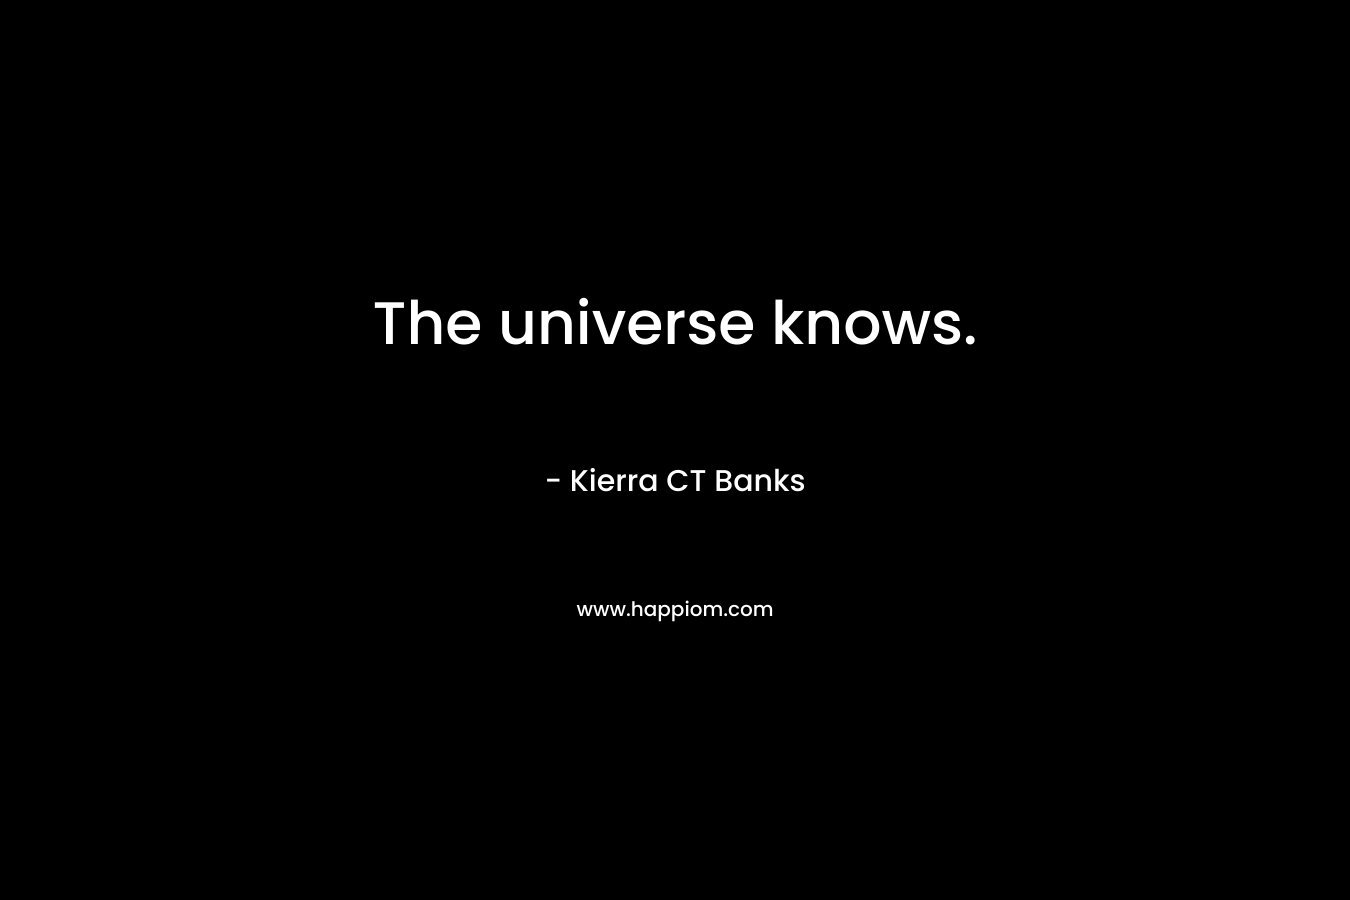 The universe knows.